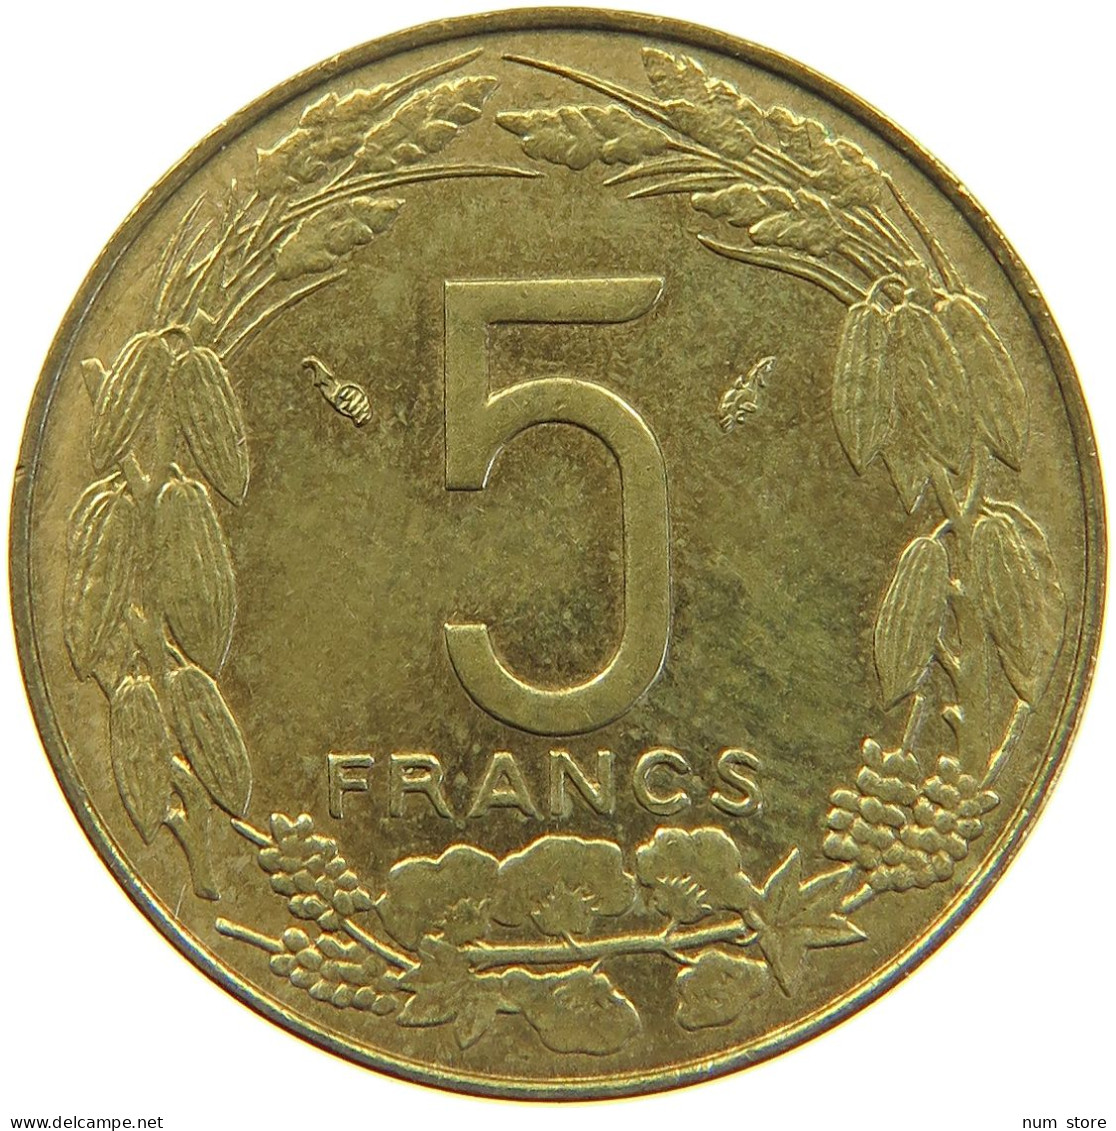 CENTRAL AFRICAN STATES 5 FRANCS 1975  #c016 0161 - Central African Republic